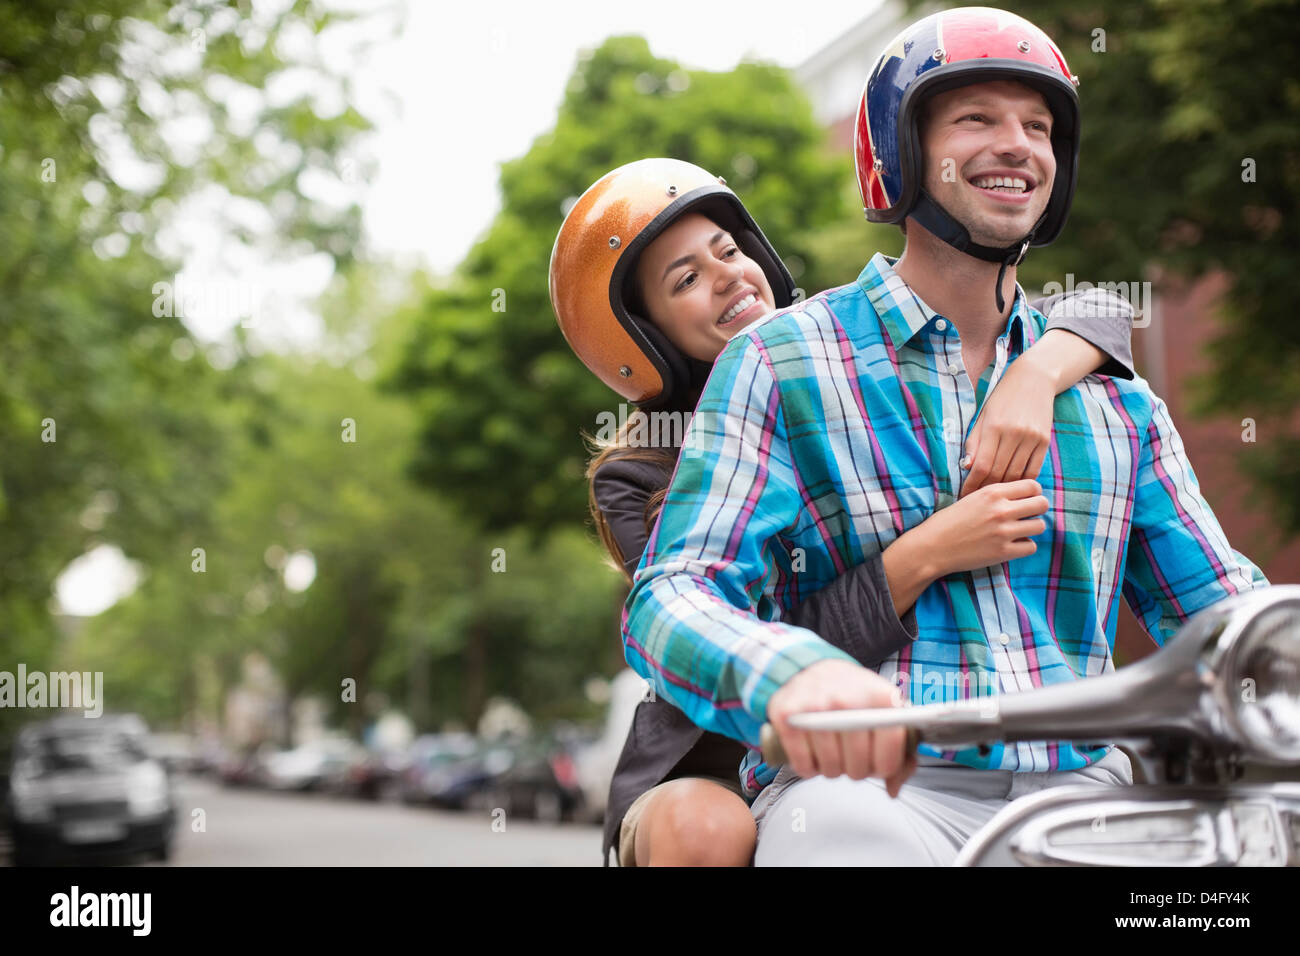 Couple riding scooter together outdoors Banque D'Images